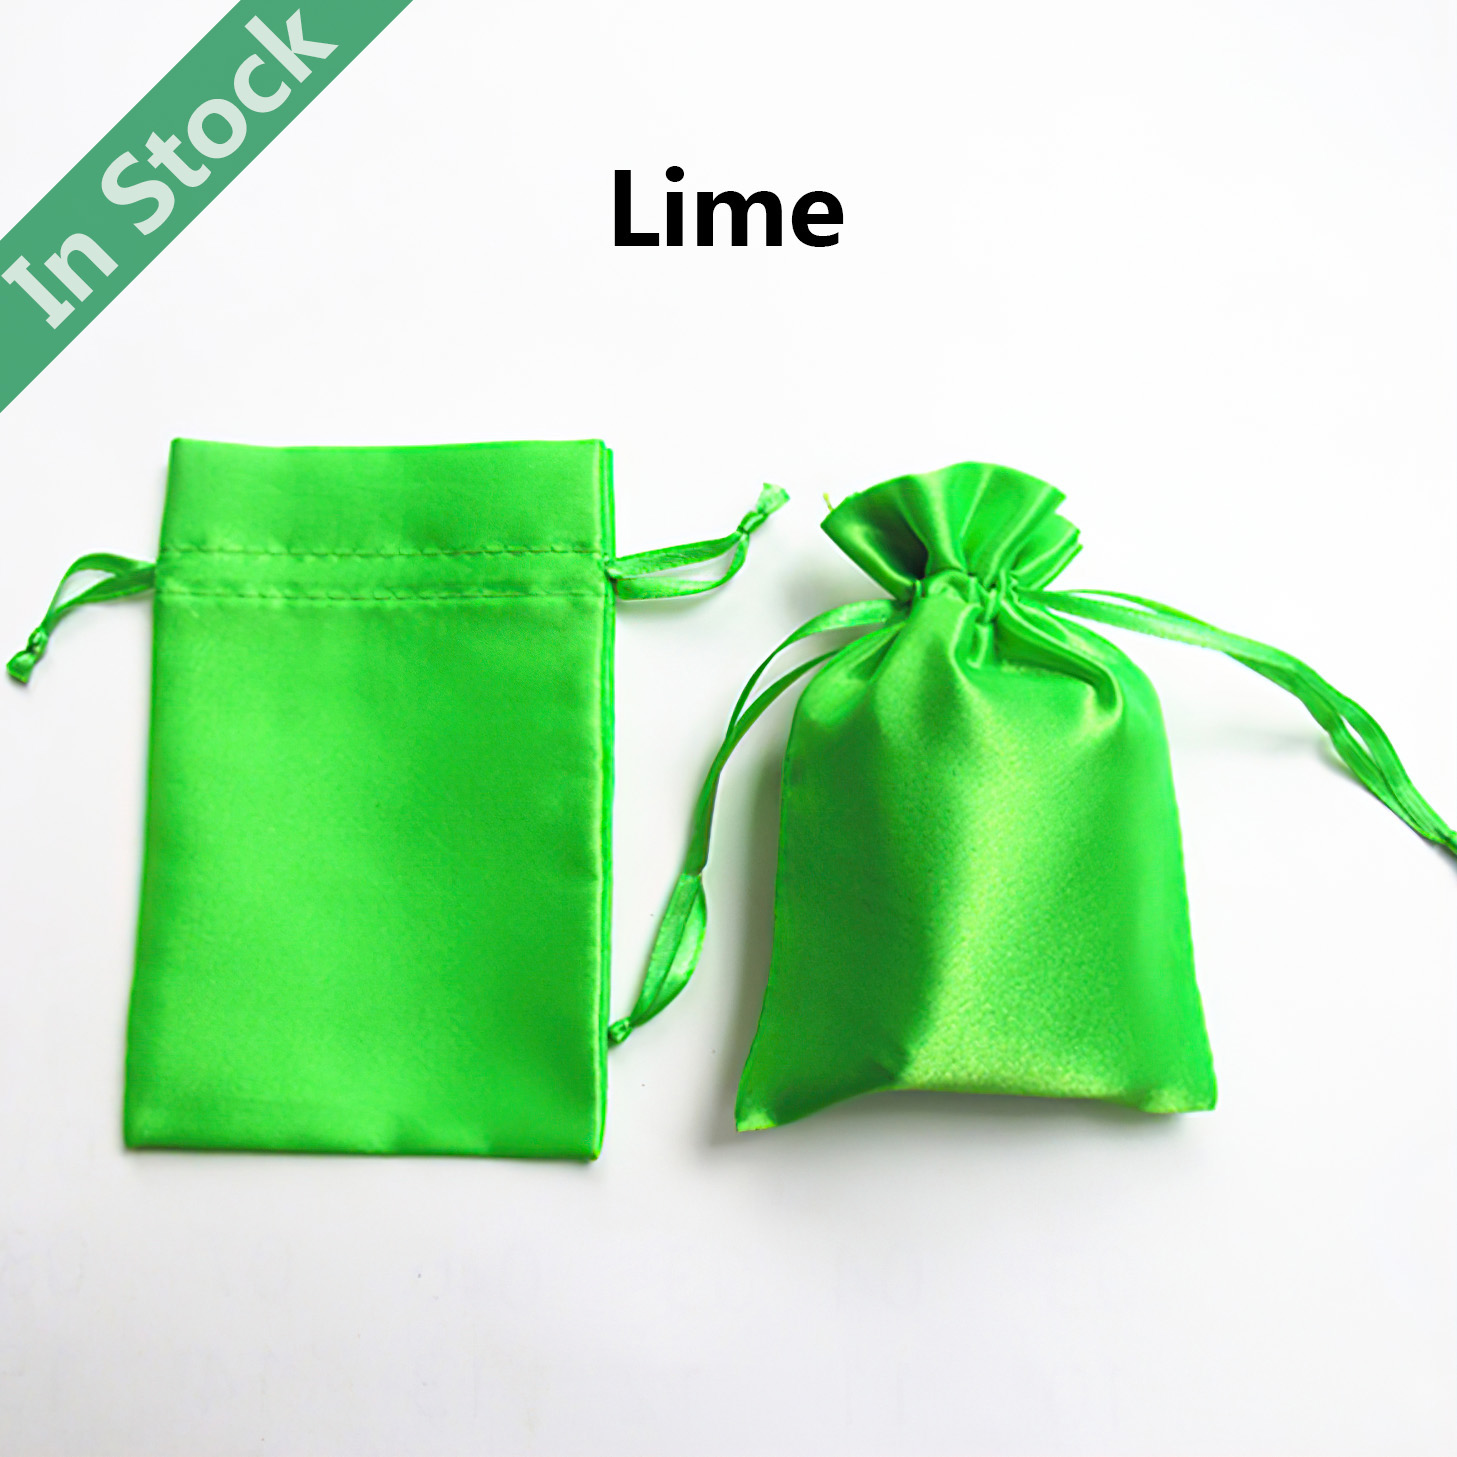 Details more than 243 gift pouch bags wholesale latest